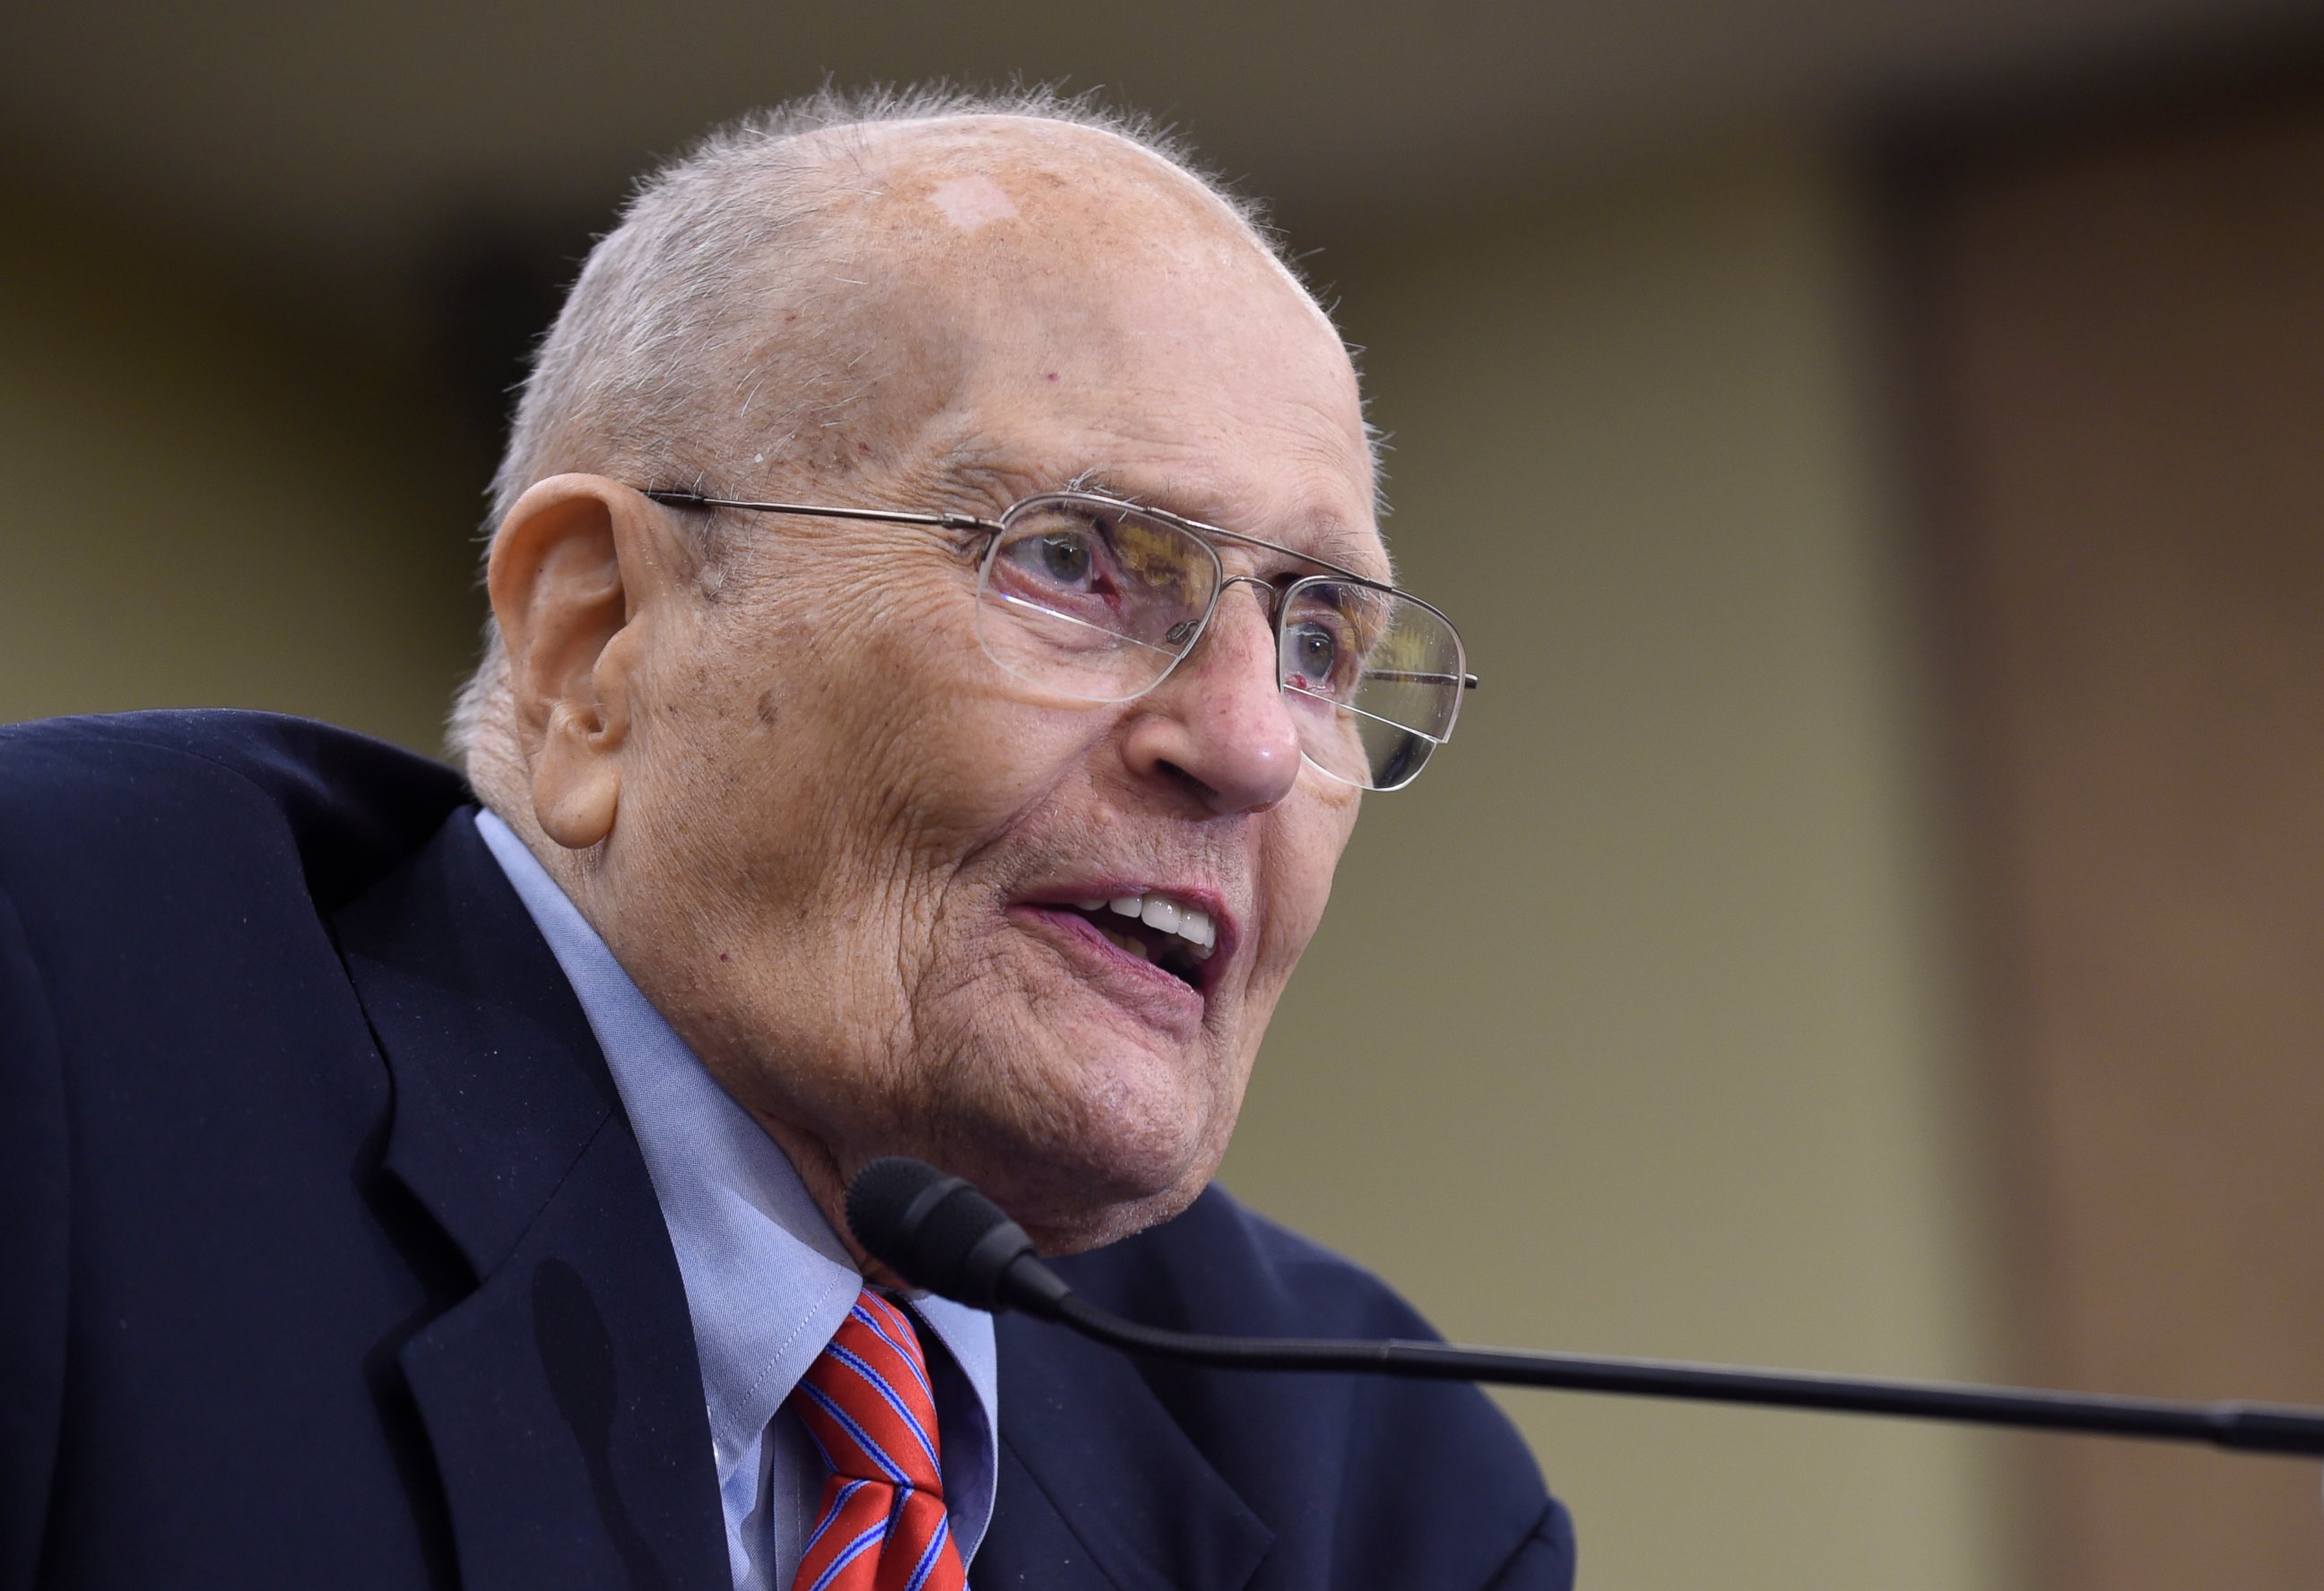 PHOTO: In this July 29, 2015 file photo, former Rep. John Dingell, D-Mich., speaks at an event marking the 50th Anniversary of Medicare and Medicaid on Capitol Hill in Washington. 